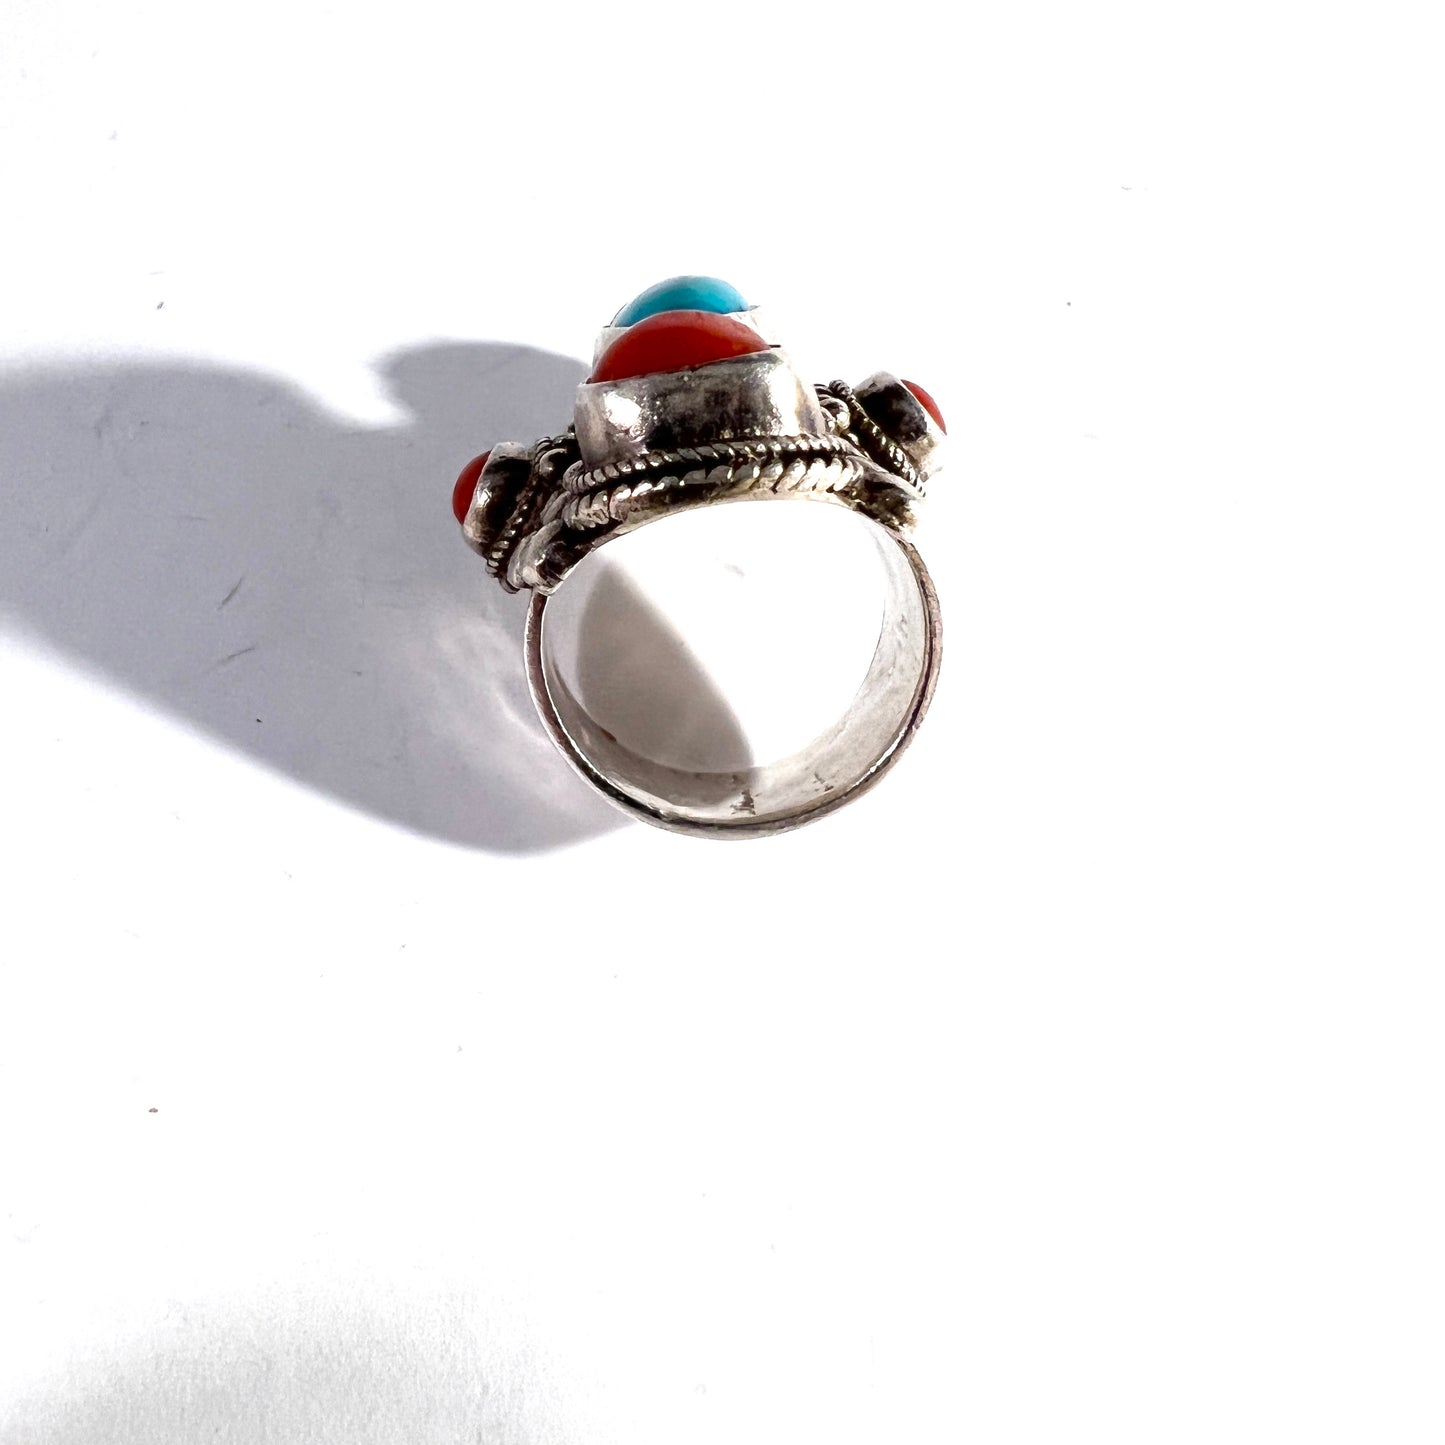 Vintage Native American Bold Sterling Silver Turquoise Coral Ring.